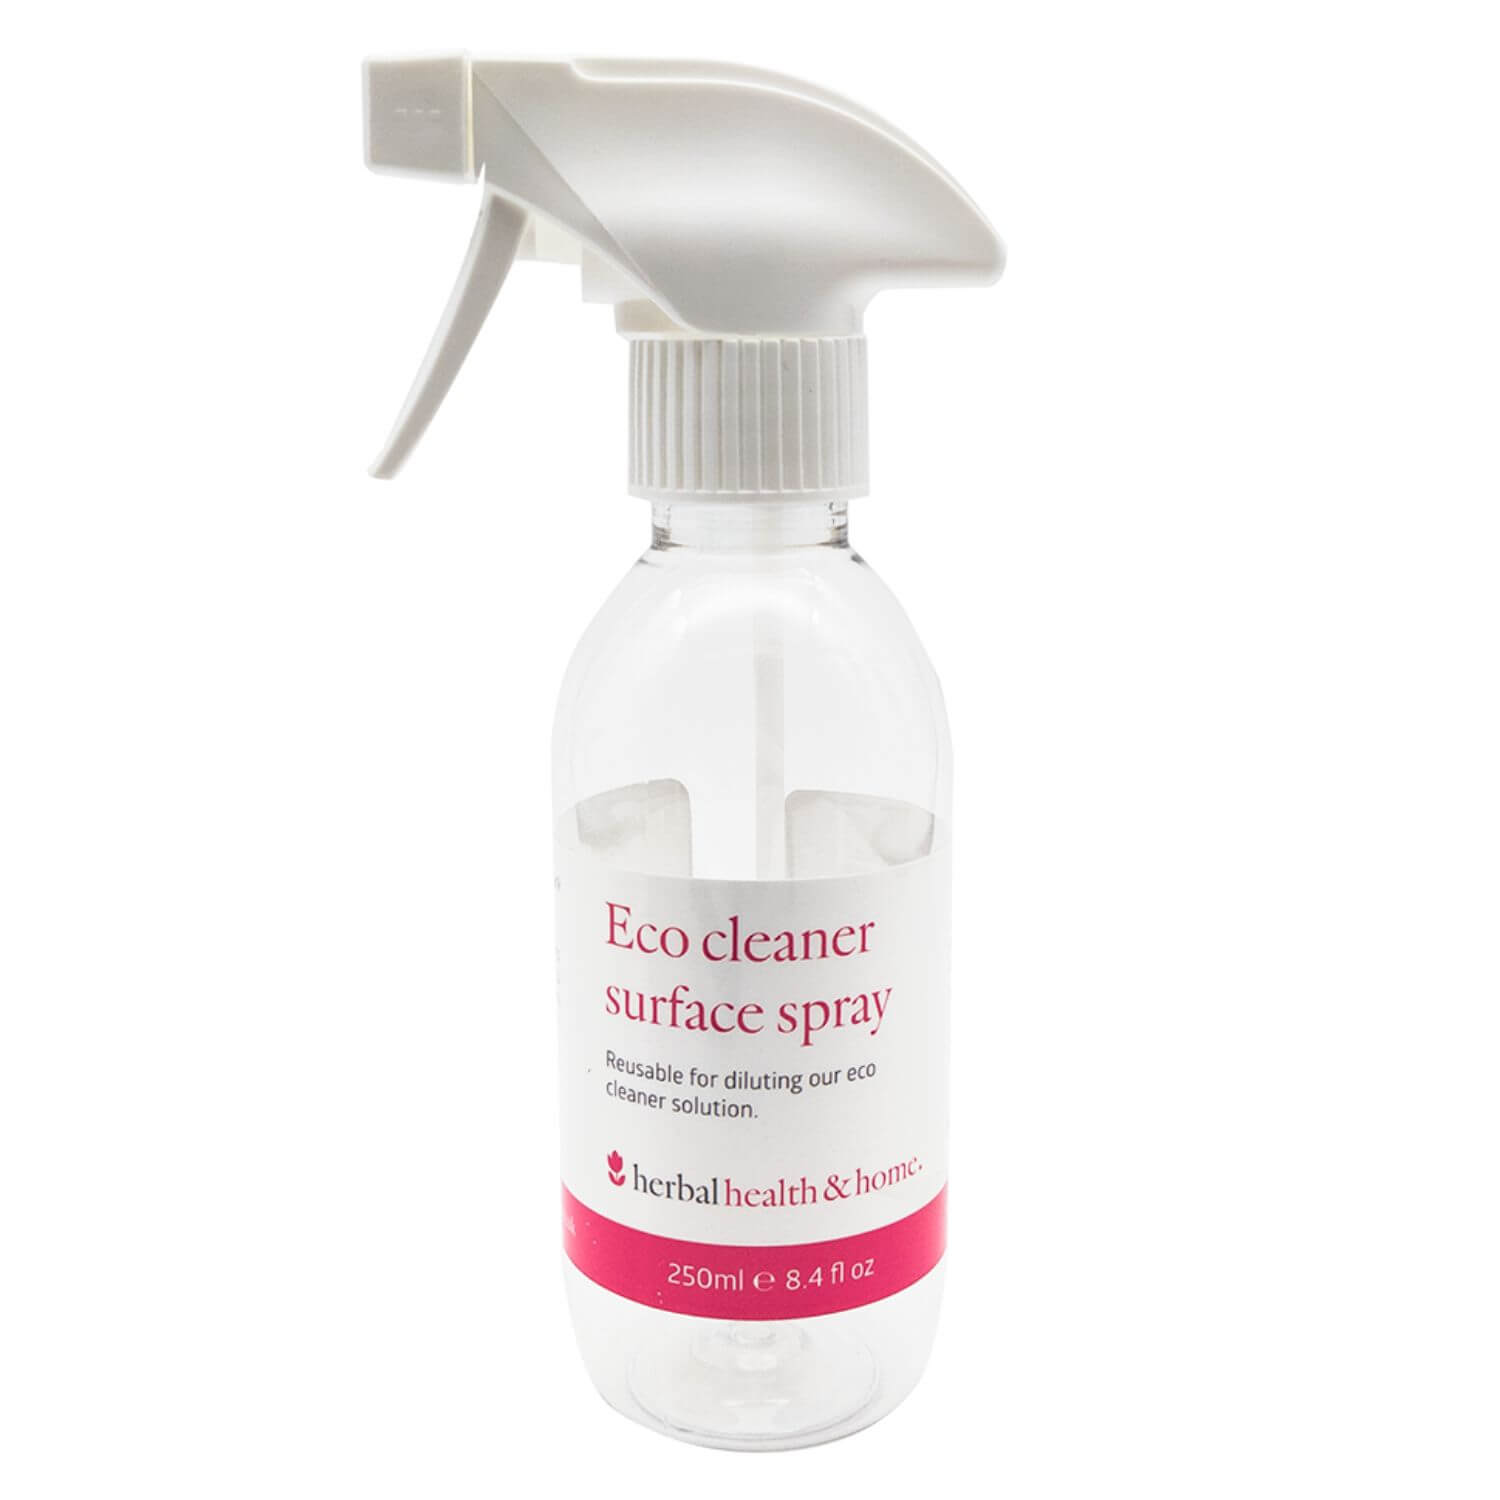 Eco Cleaner Decant Spray Bottle | Herbal, Health & Home